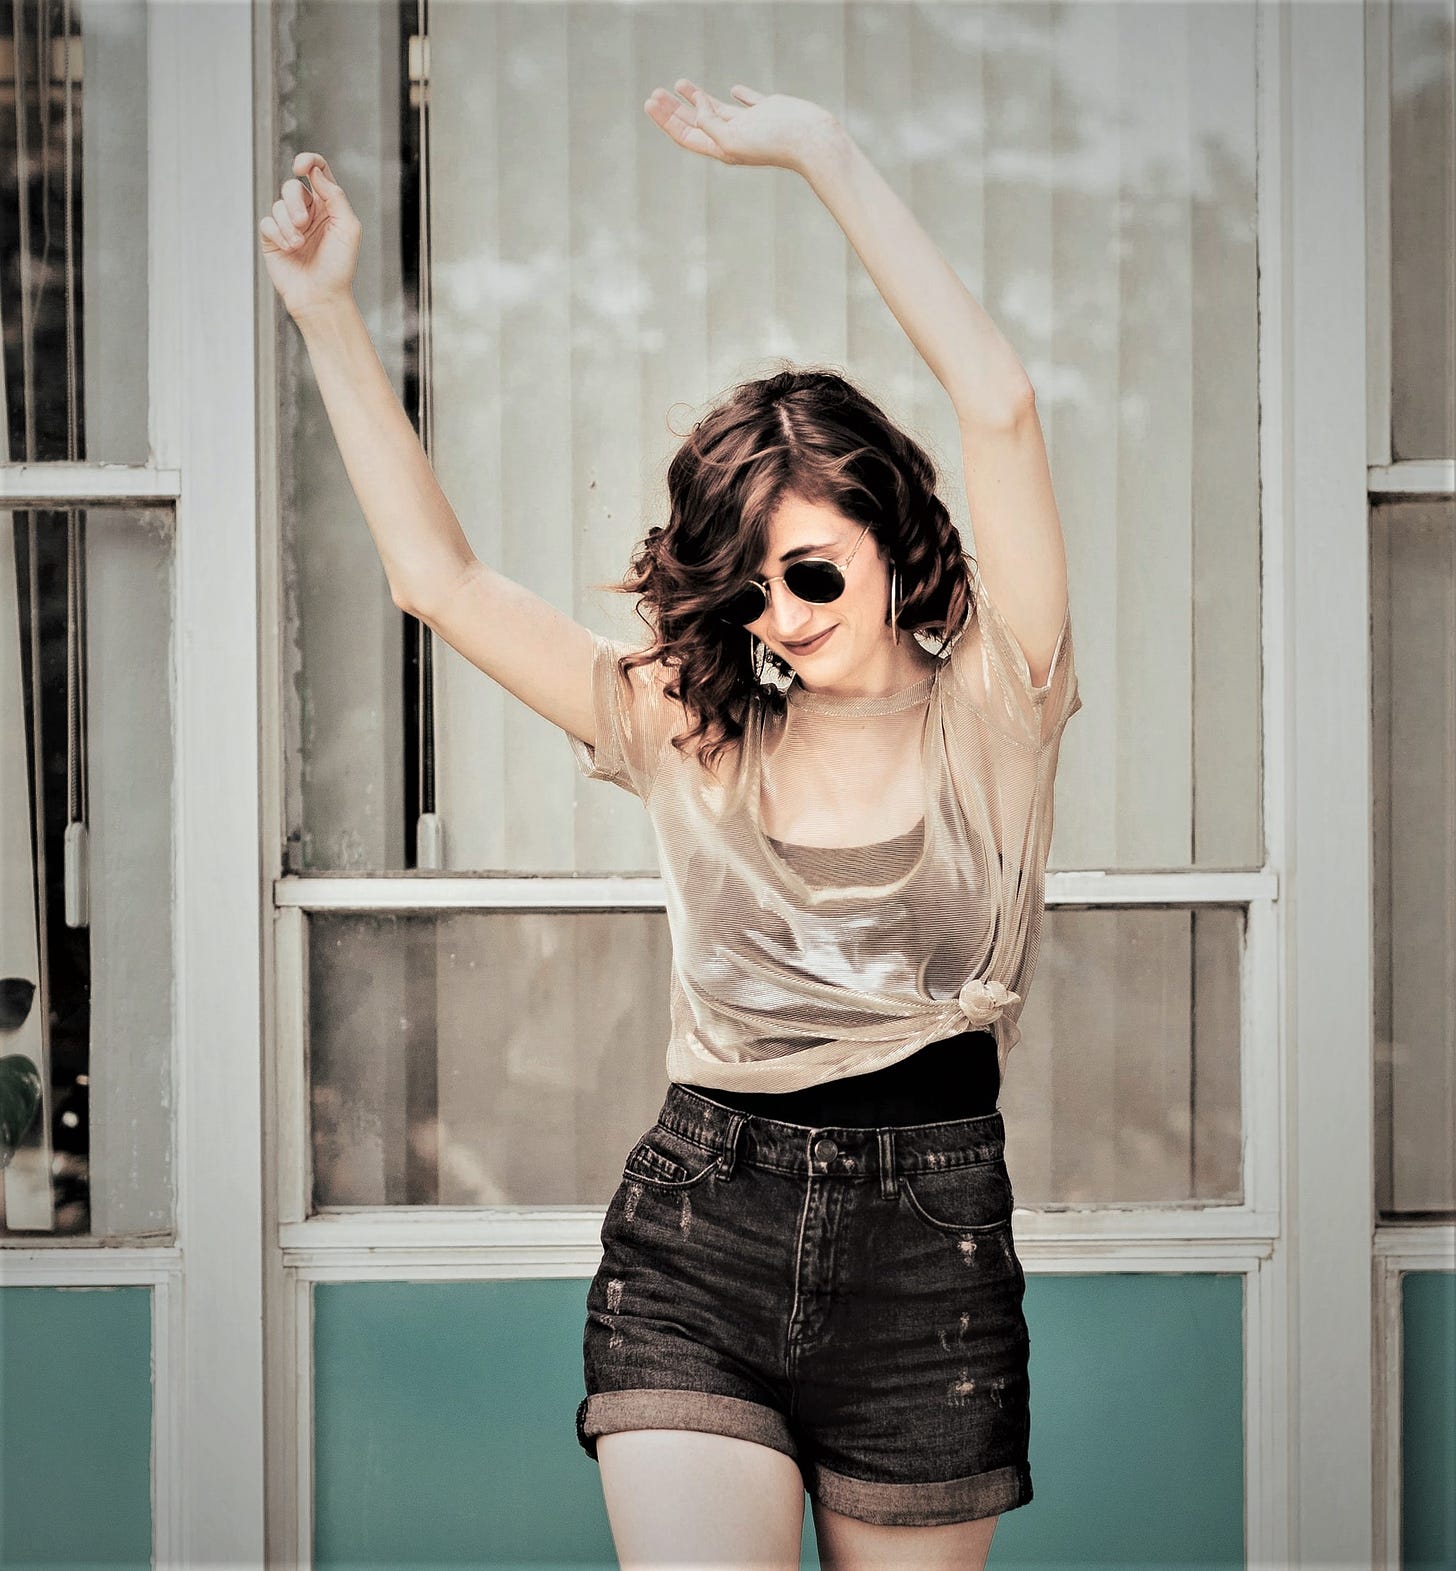 happy girl with brown hair wearing dark glasses waving her arms in the air